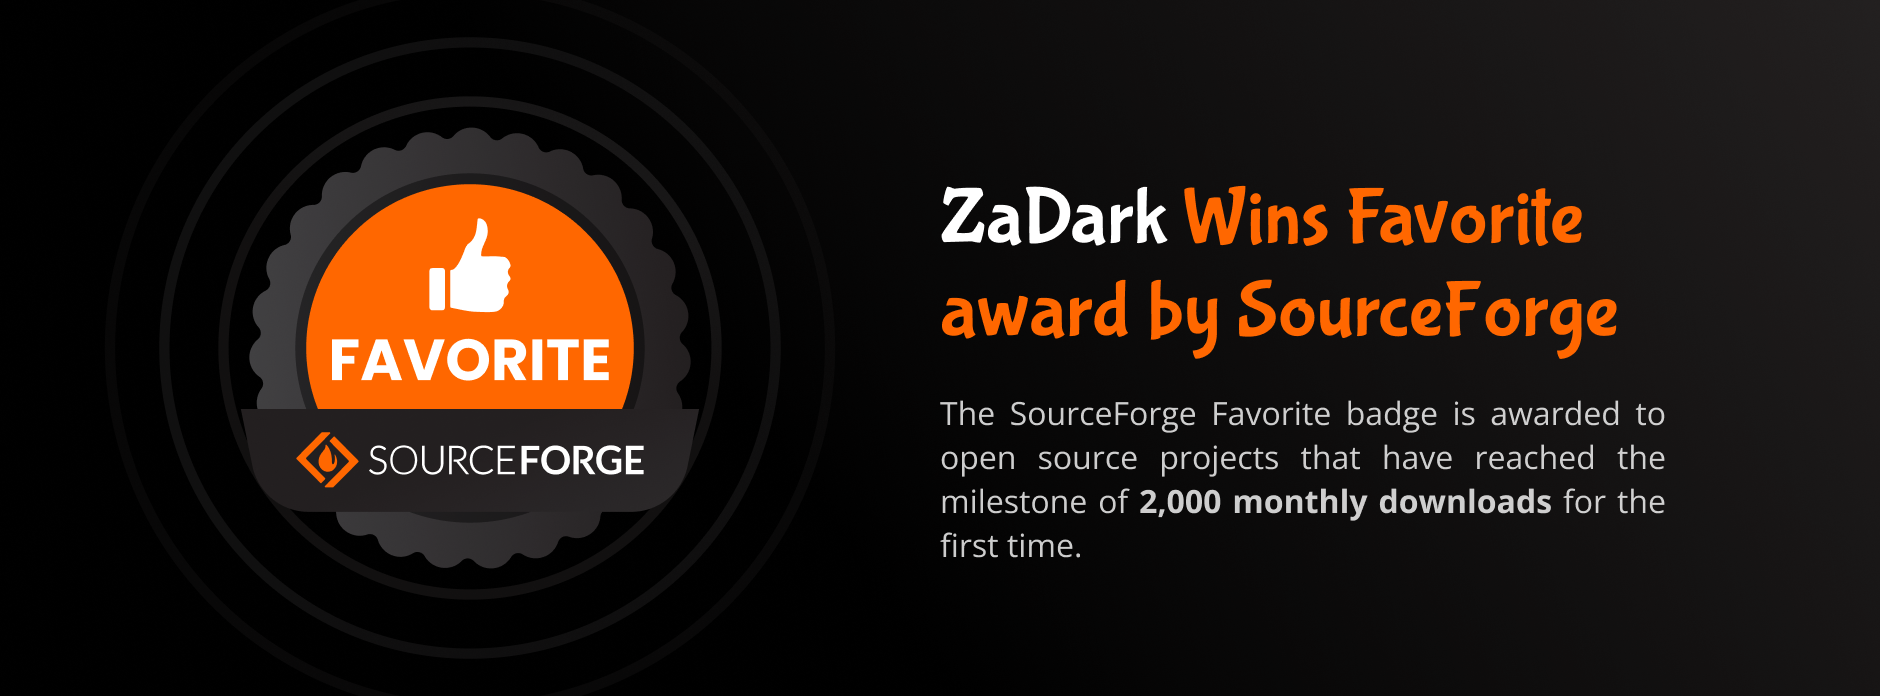 Favorite award by SourceForge